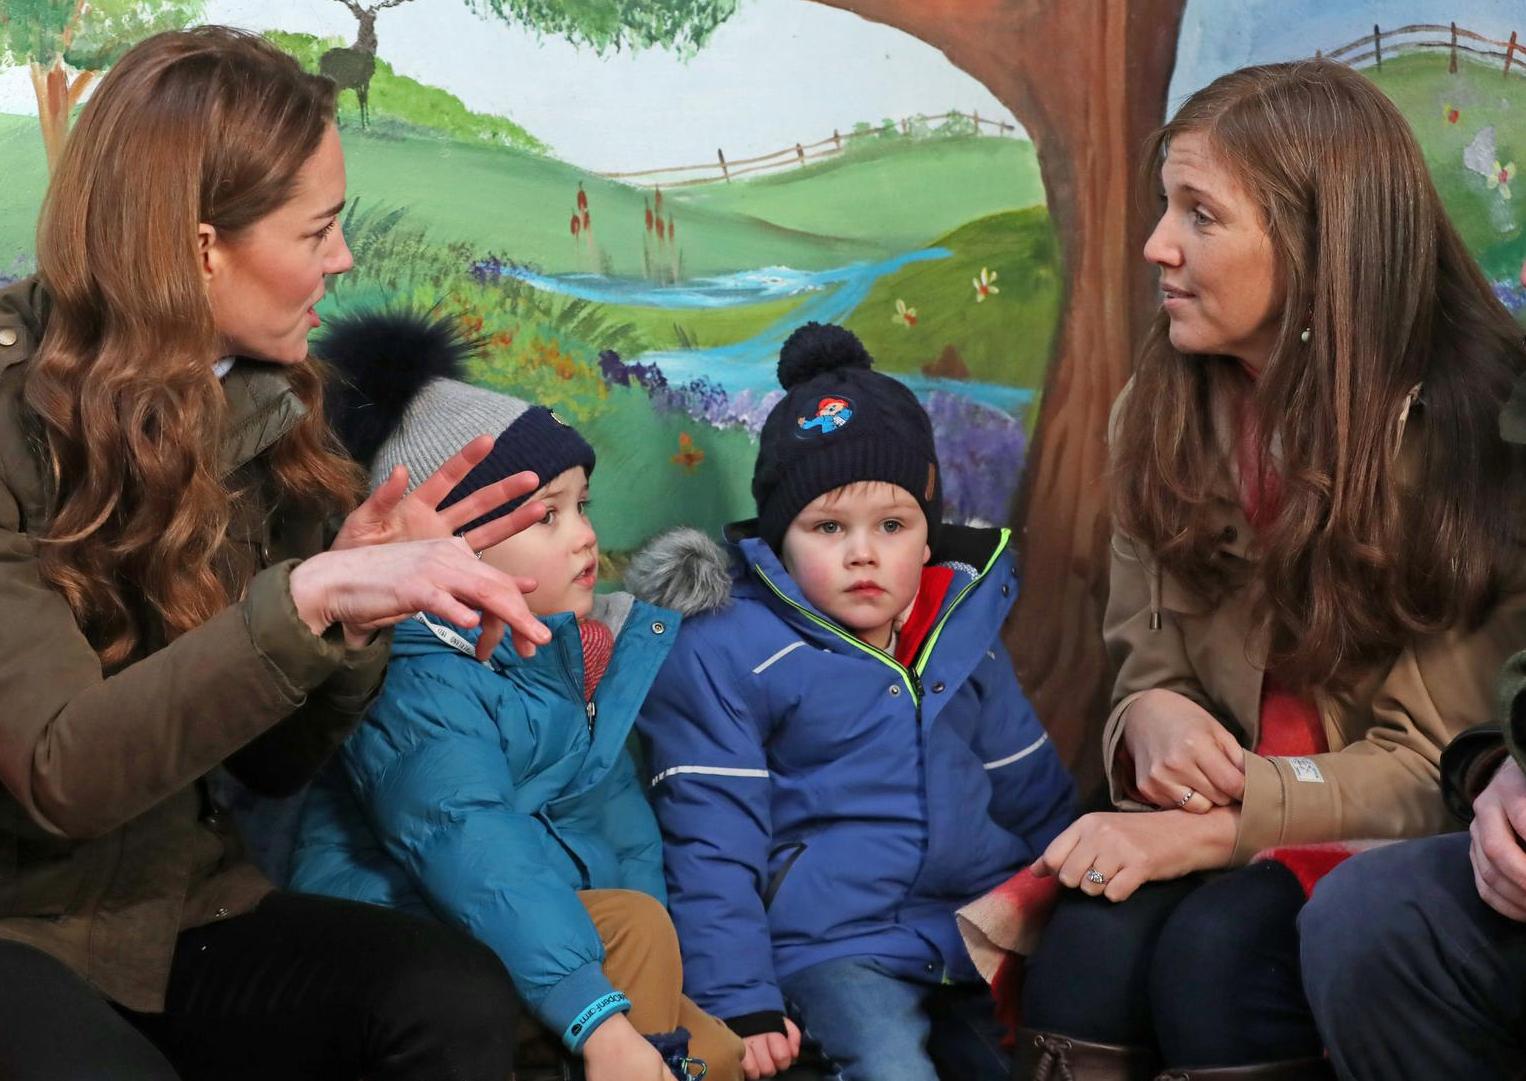 The Duchess of Cambridge meets members of the public at the Ark Open Farm, in Newtownards, near Belfast, during a visit to meet with parents and grandparents to discuss their experiences of raising young children for her Early Childhood survey